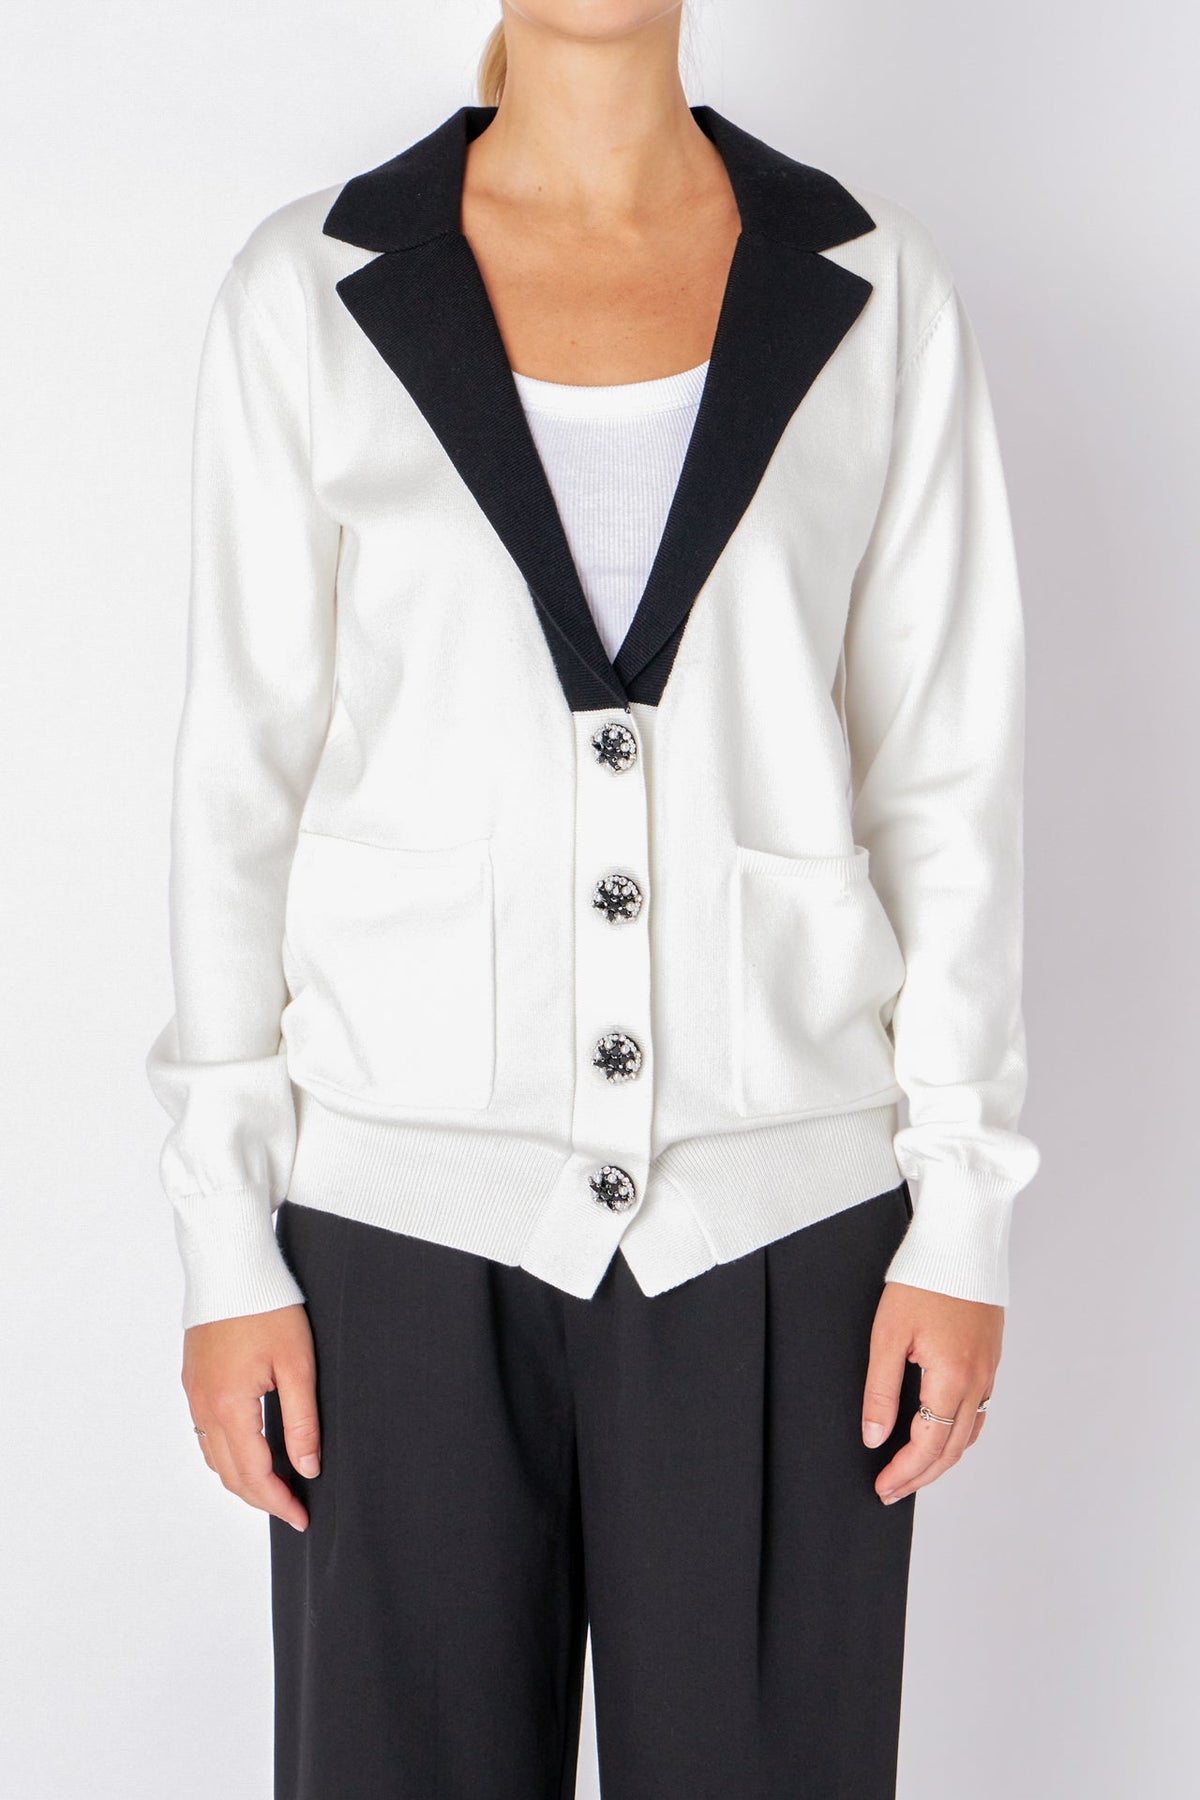 ENDLESS ROSE - Premium Jewel Knit Blazer Cardigan - SWEATERS & KNITS available at Objectrare